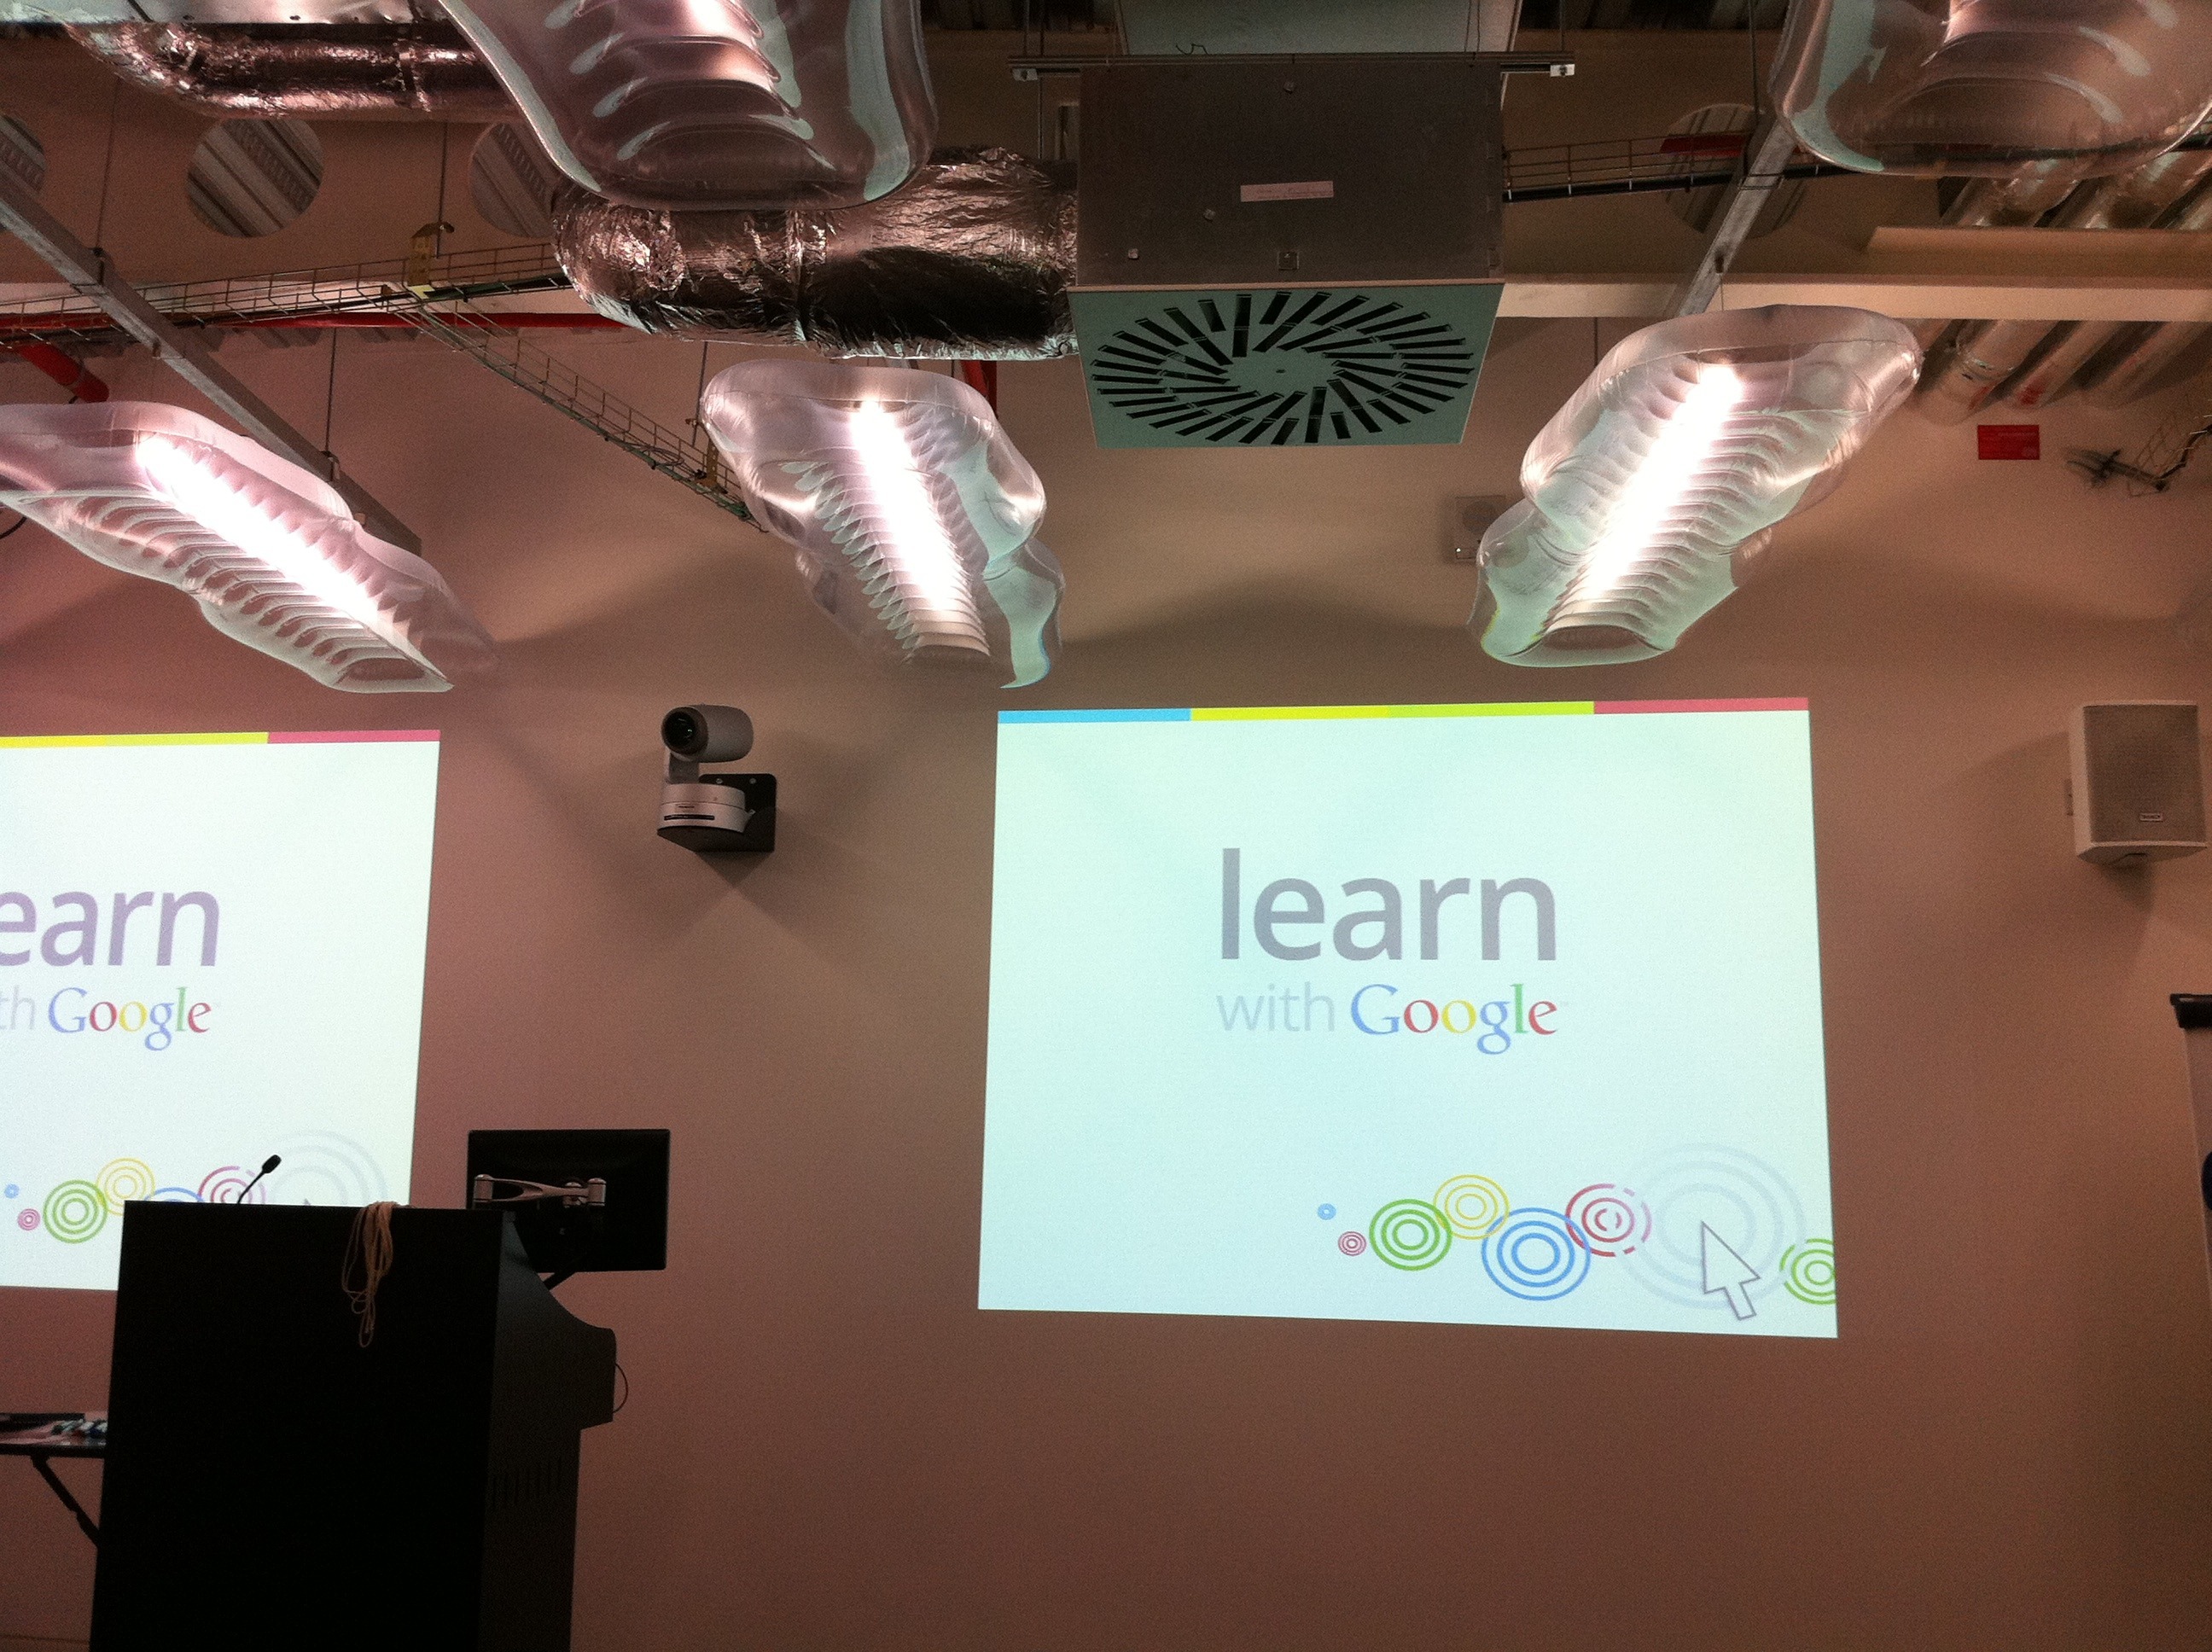 New London Google office - Learn with Google day